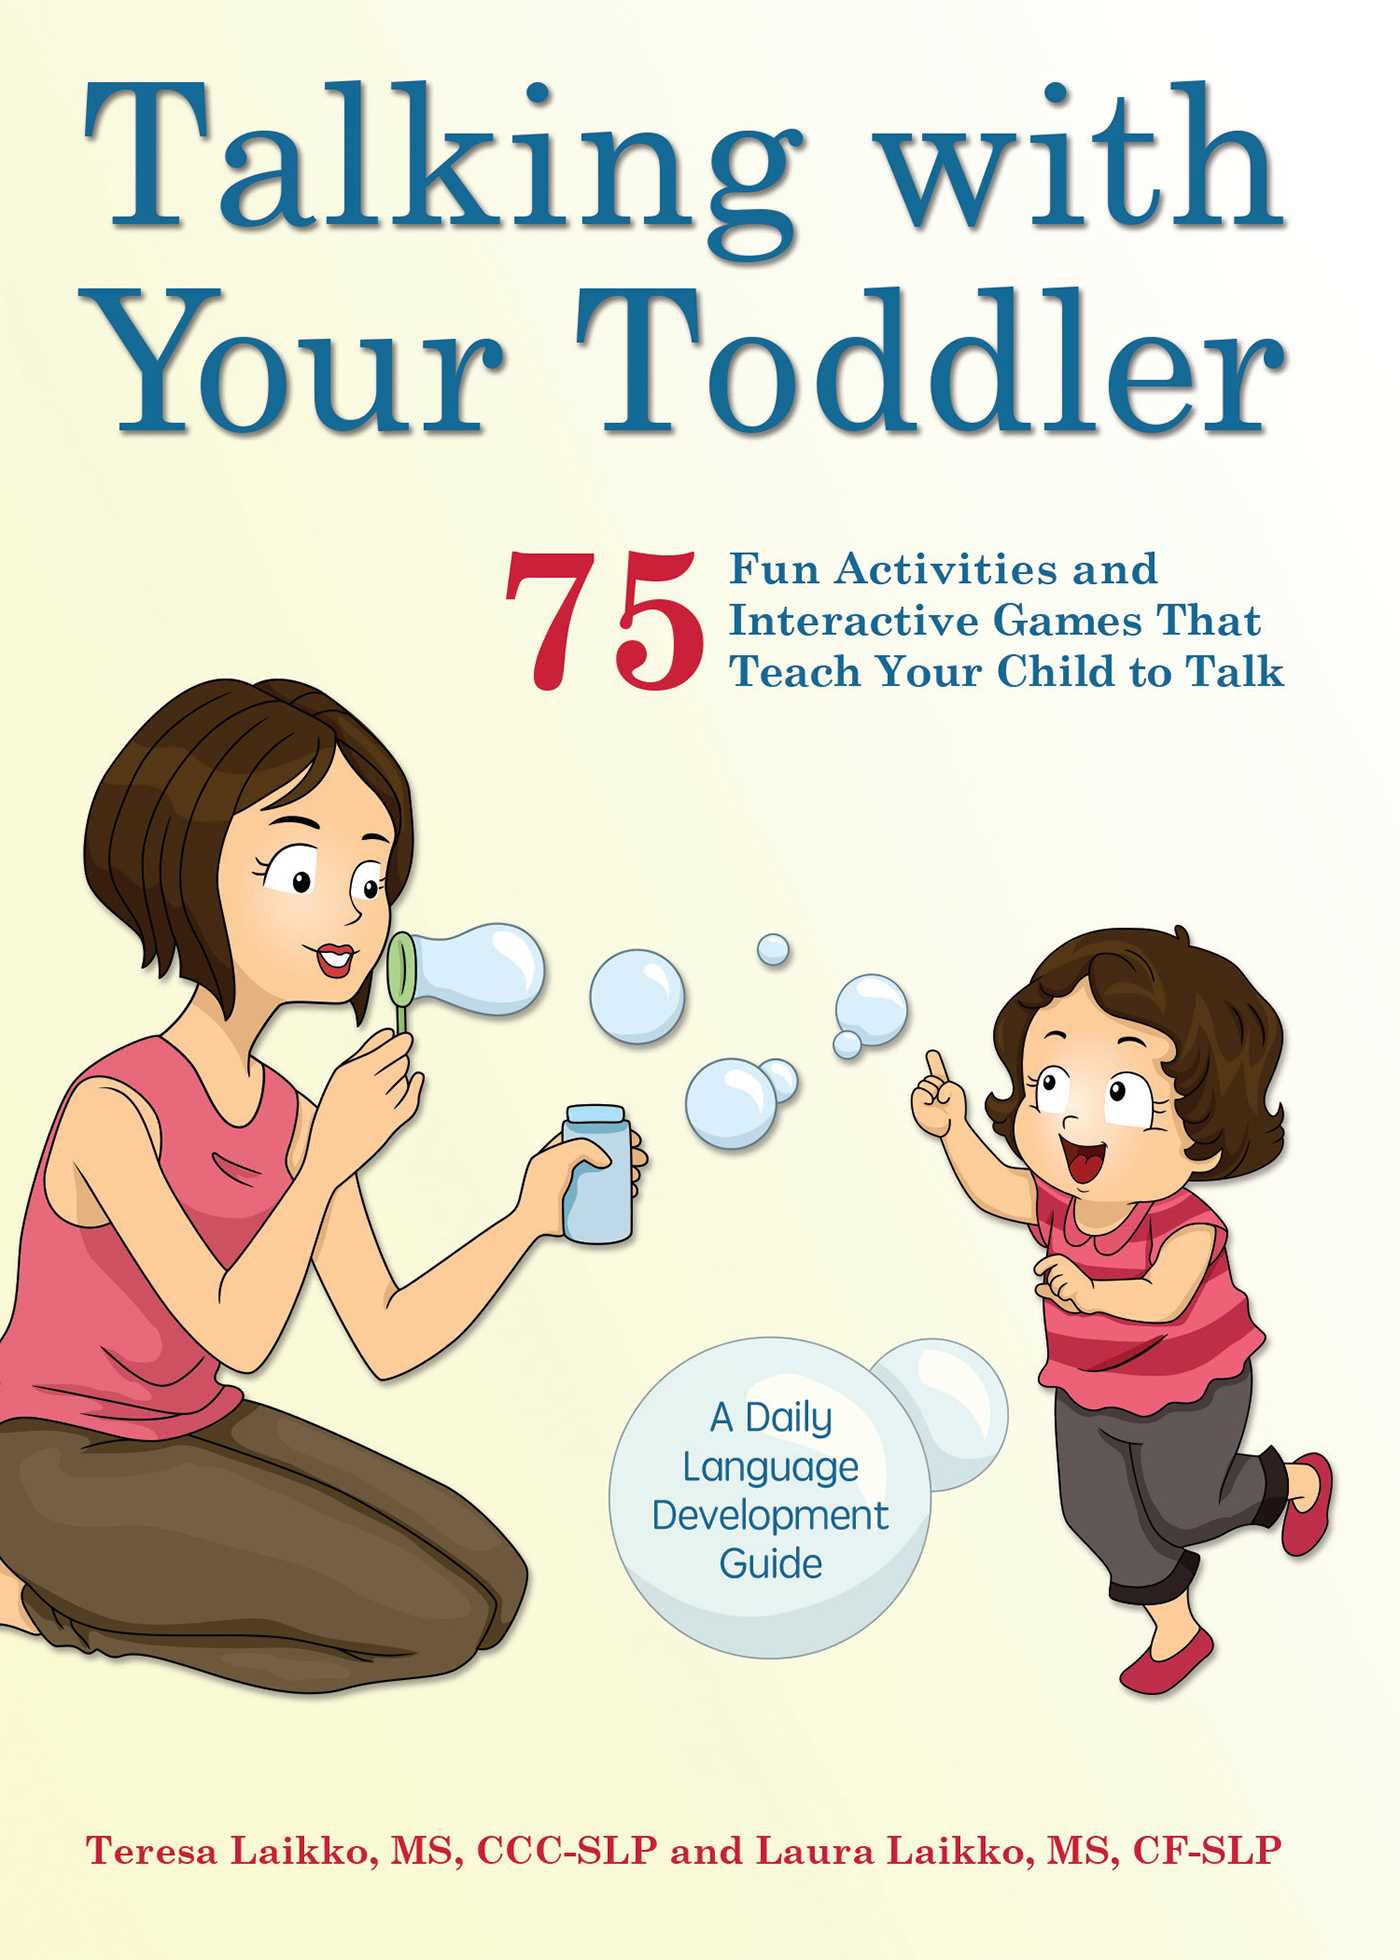 Talking with Your Toddler: 75 Fun Activities and Interactive Games That Teach Your Child to Talk